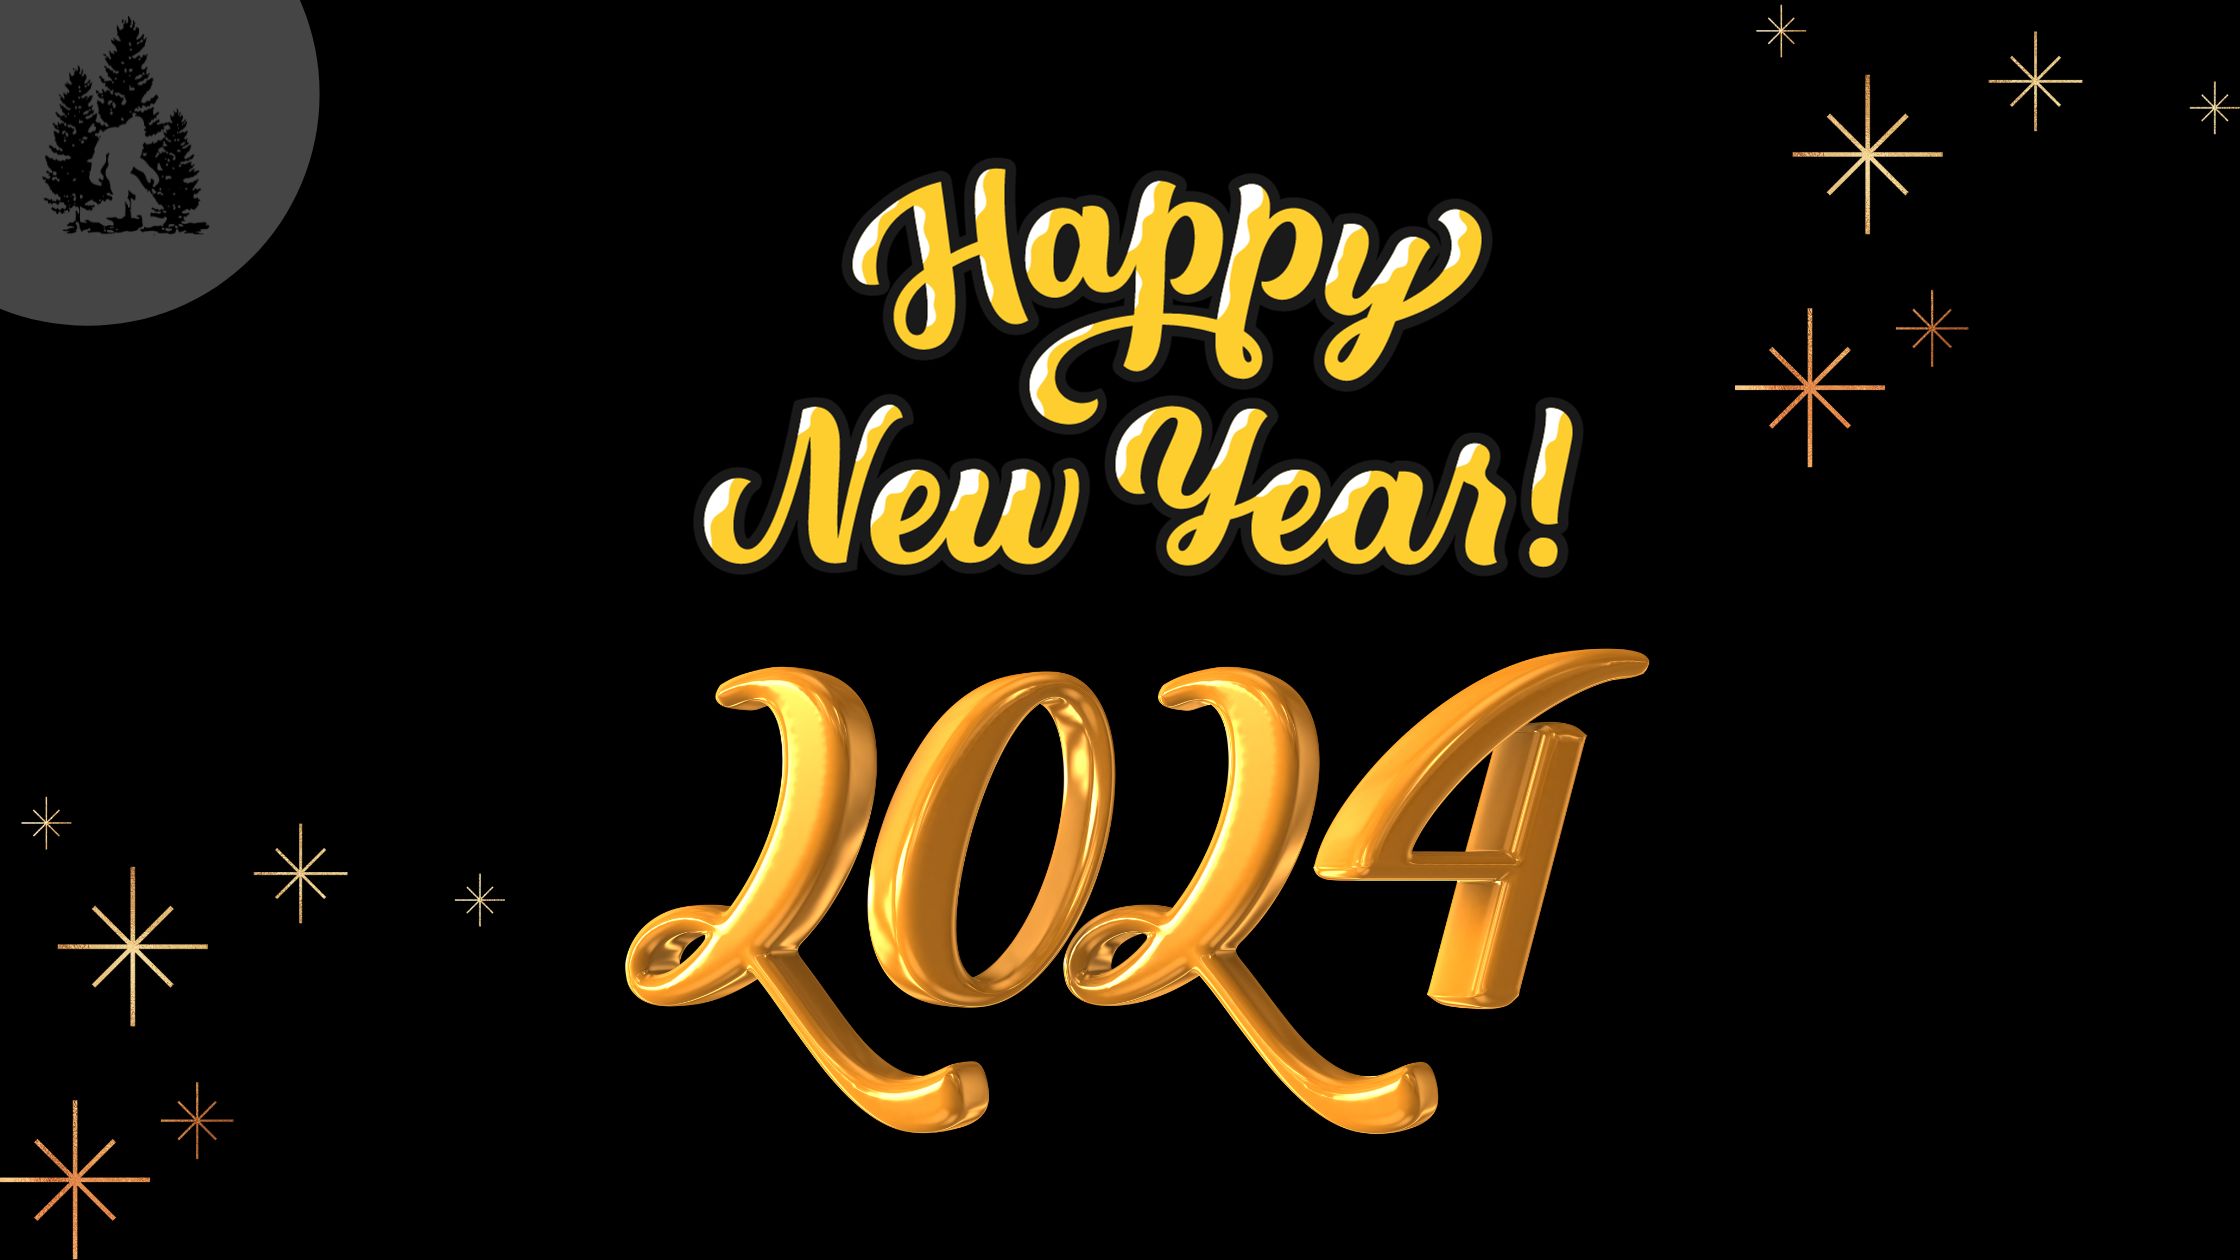 Happy New Year 2024 Wishes and Messages share with your loved ones